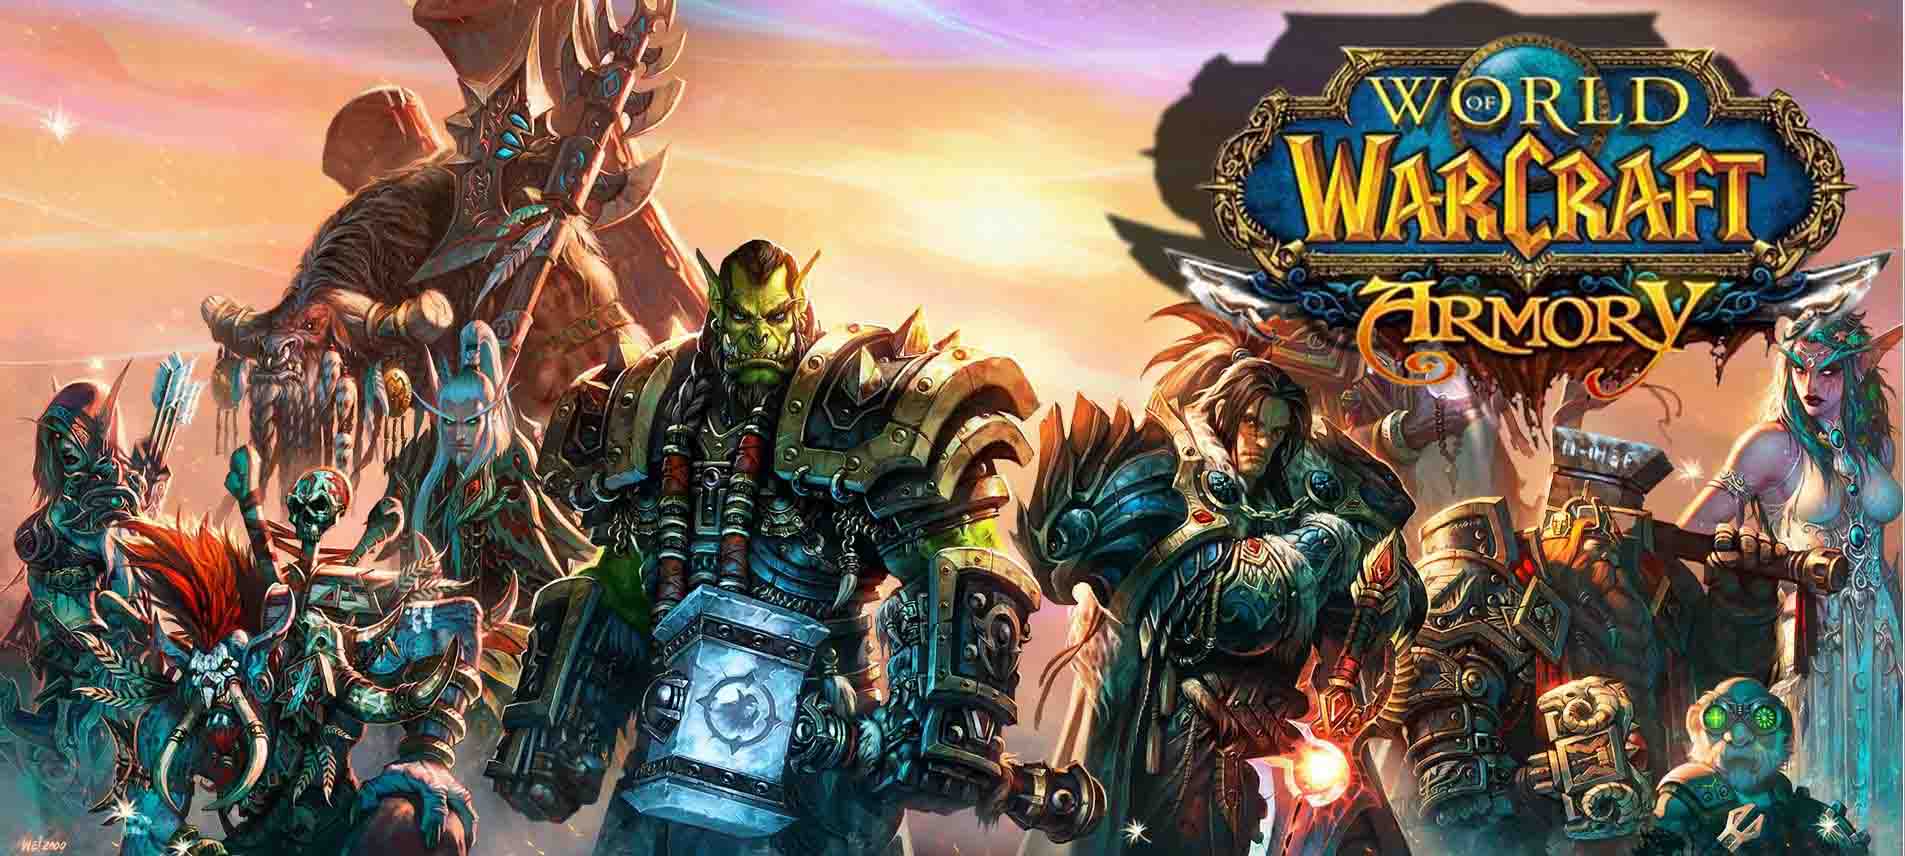 WoW Classic server maintenance extended - Burning Crusade buglist revealed